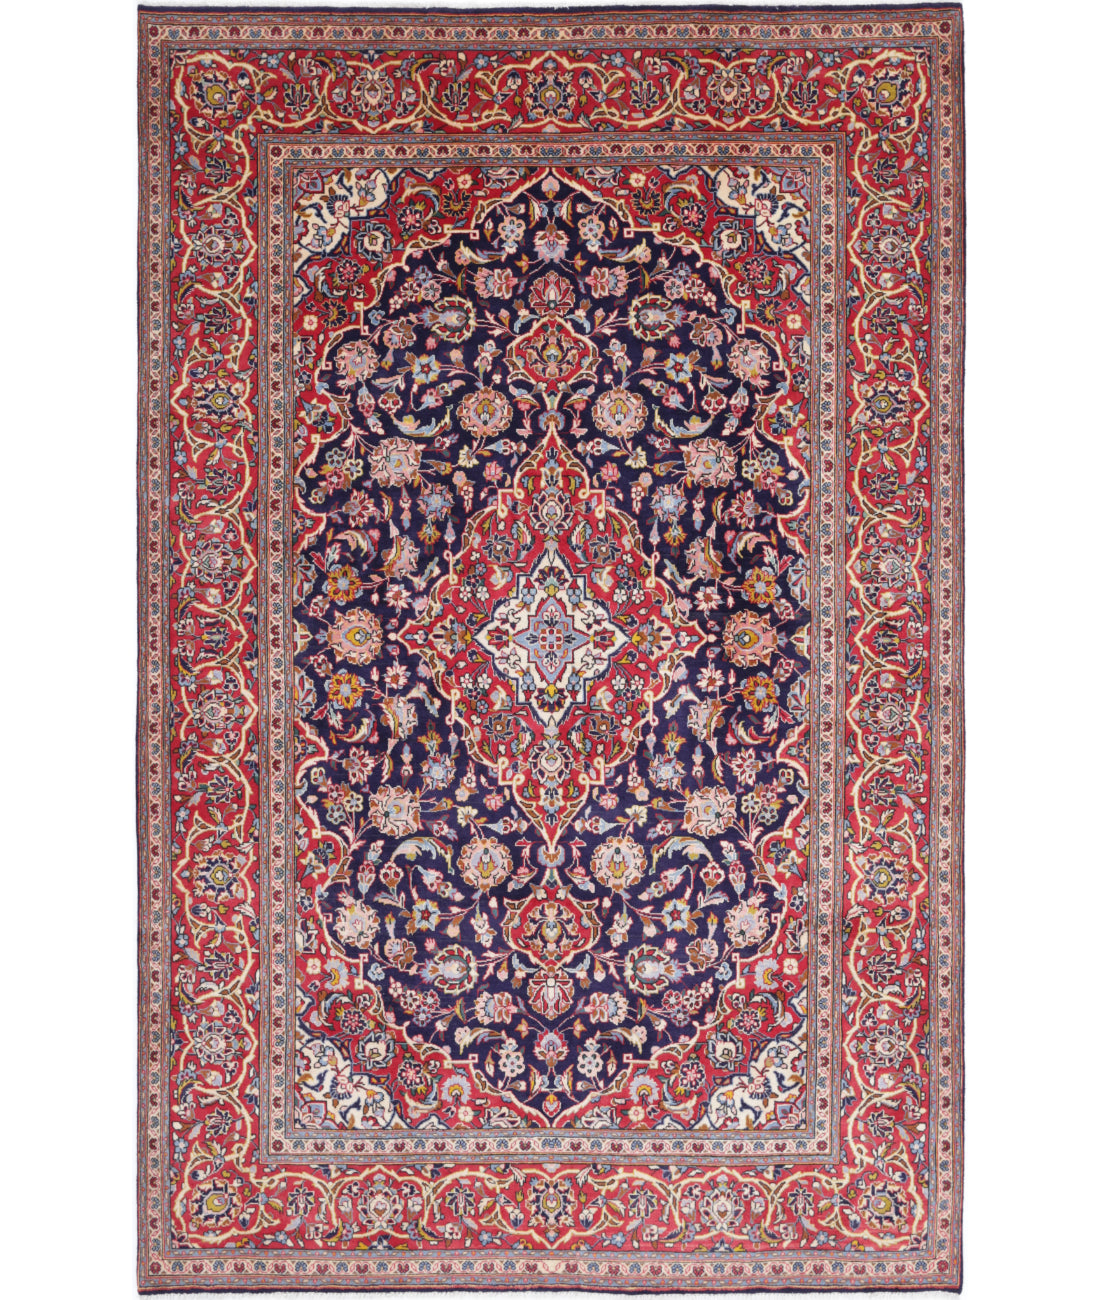 Hand Knotted Persian Kashan Wool Rug - 6'5'' x 10'3'' 6'5'' x 10'3'' (193 X 308) / Blue / Red